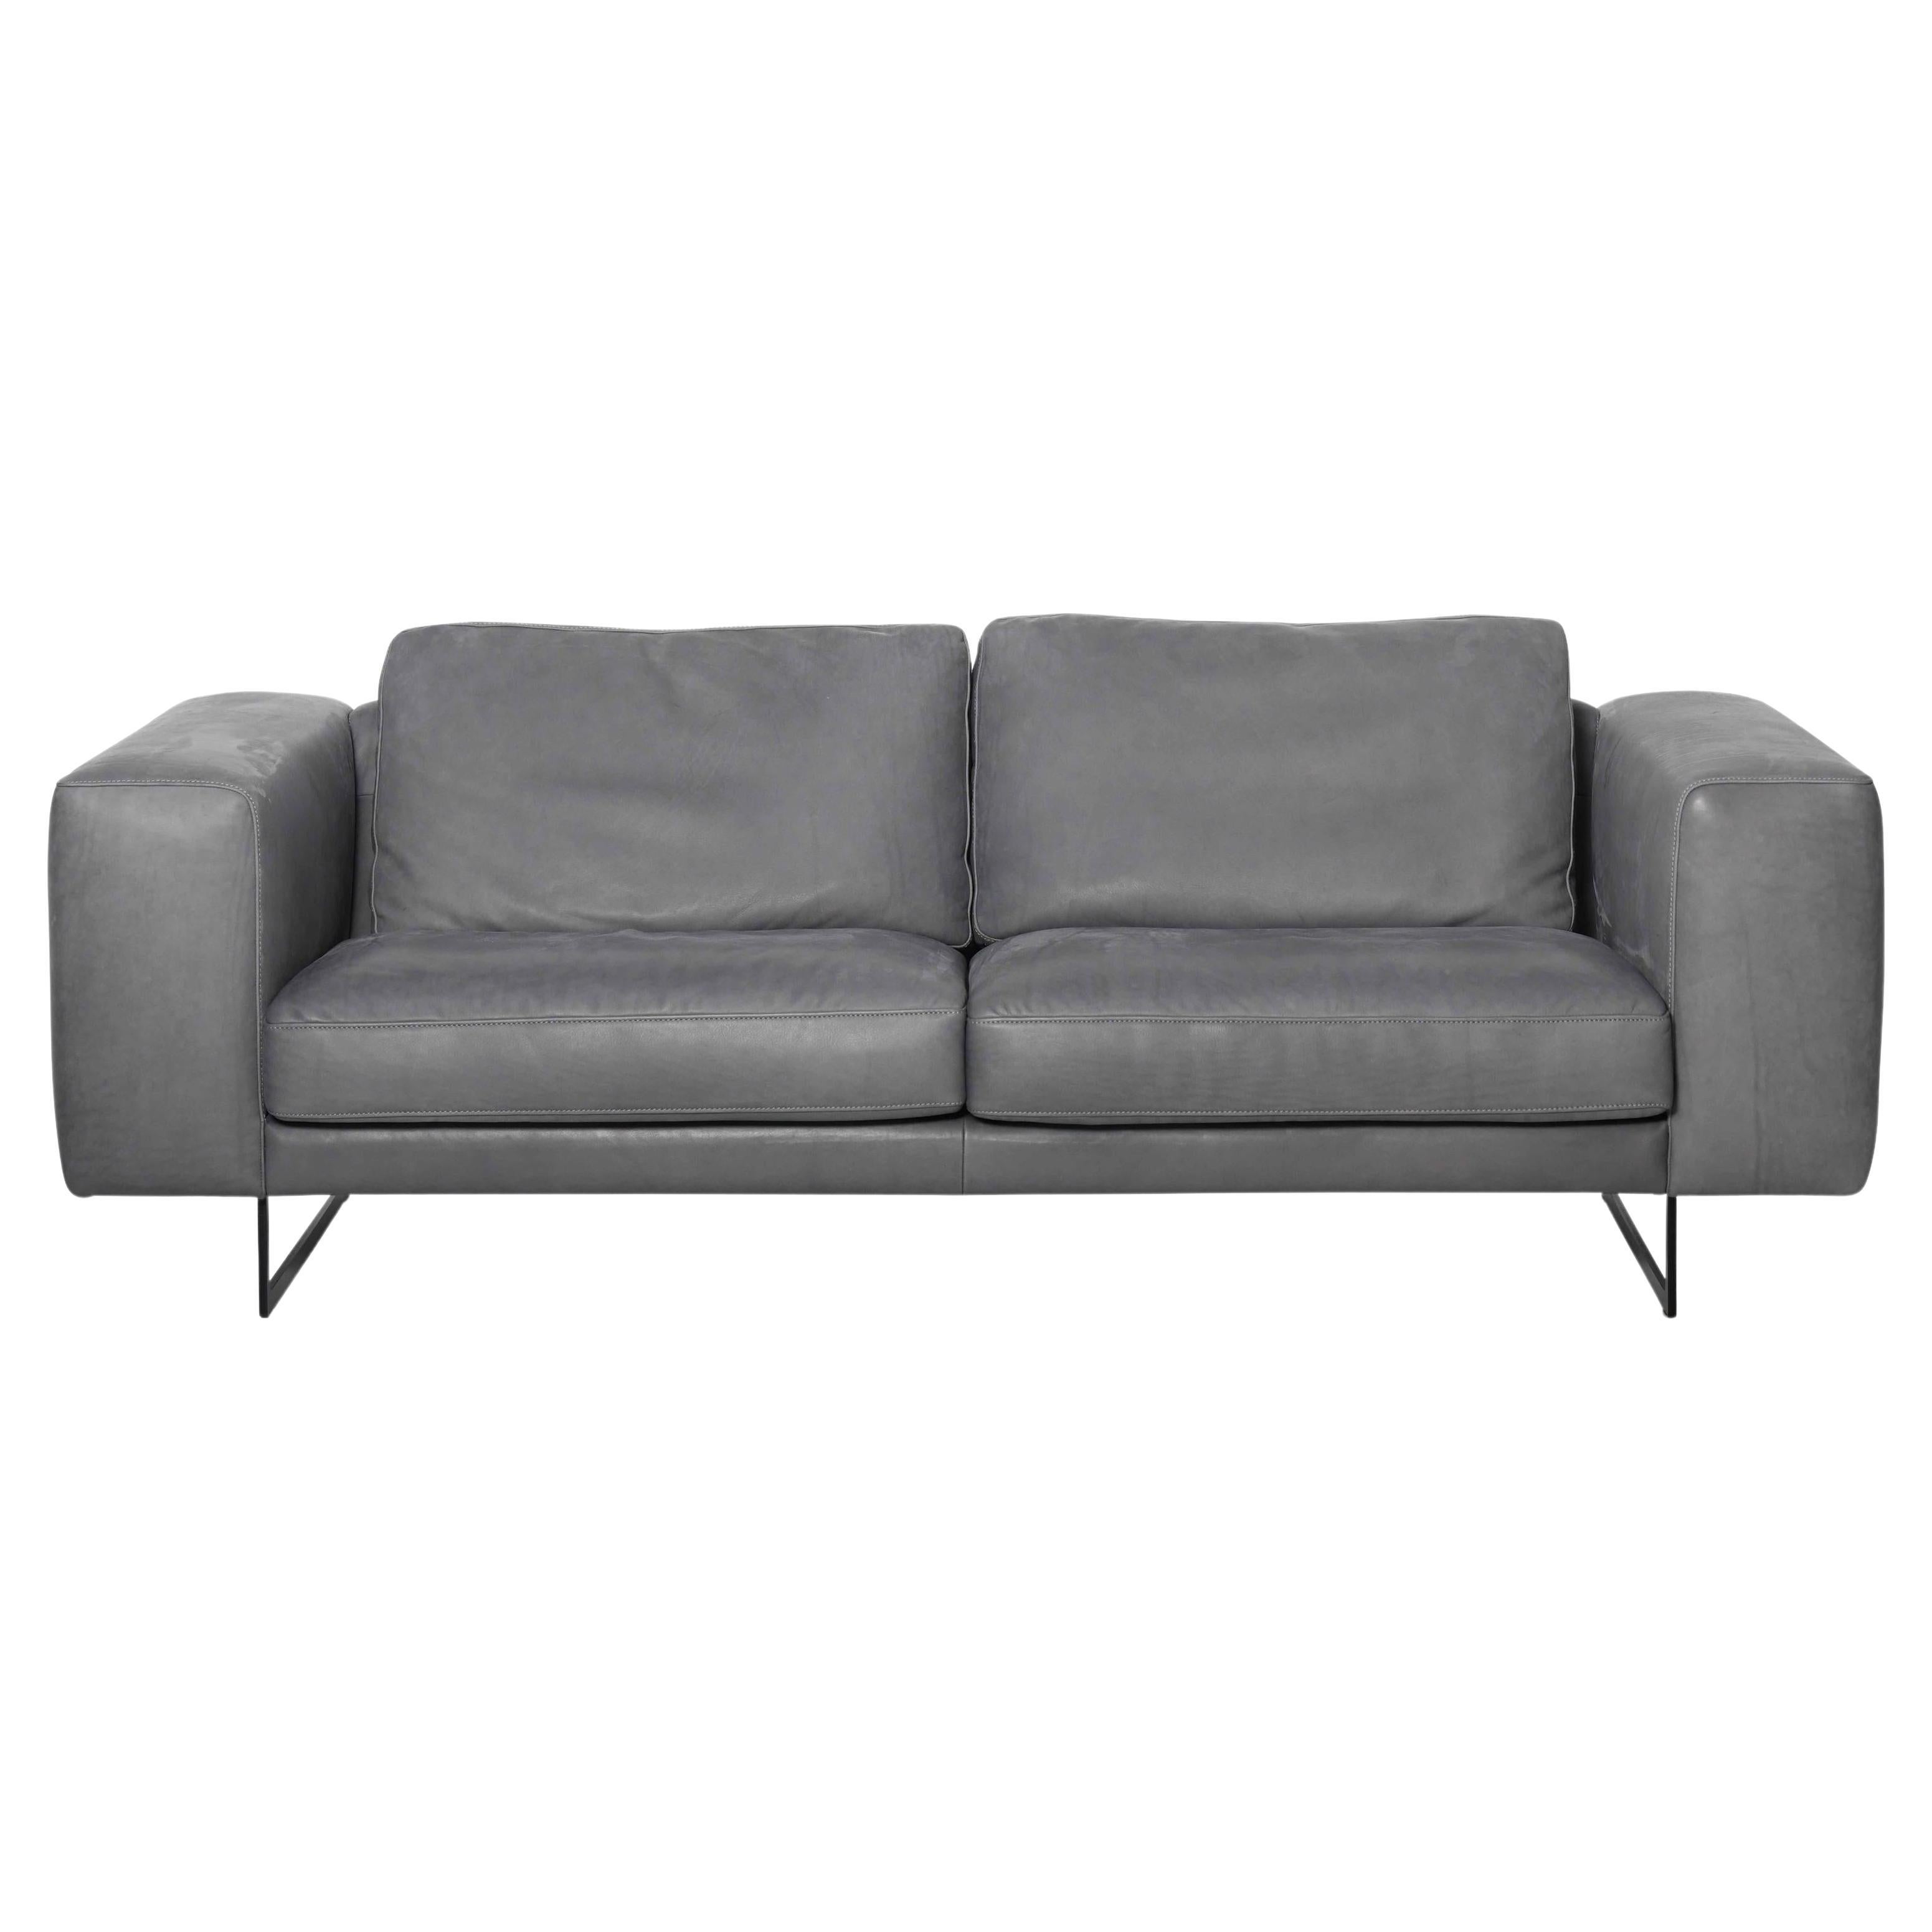 De Sede DS-748 Small Two-Seat Sofa in Paris Upholstery by Claudio Bellini